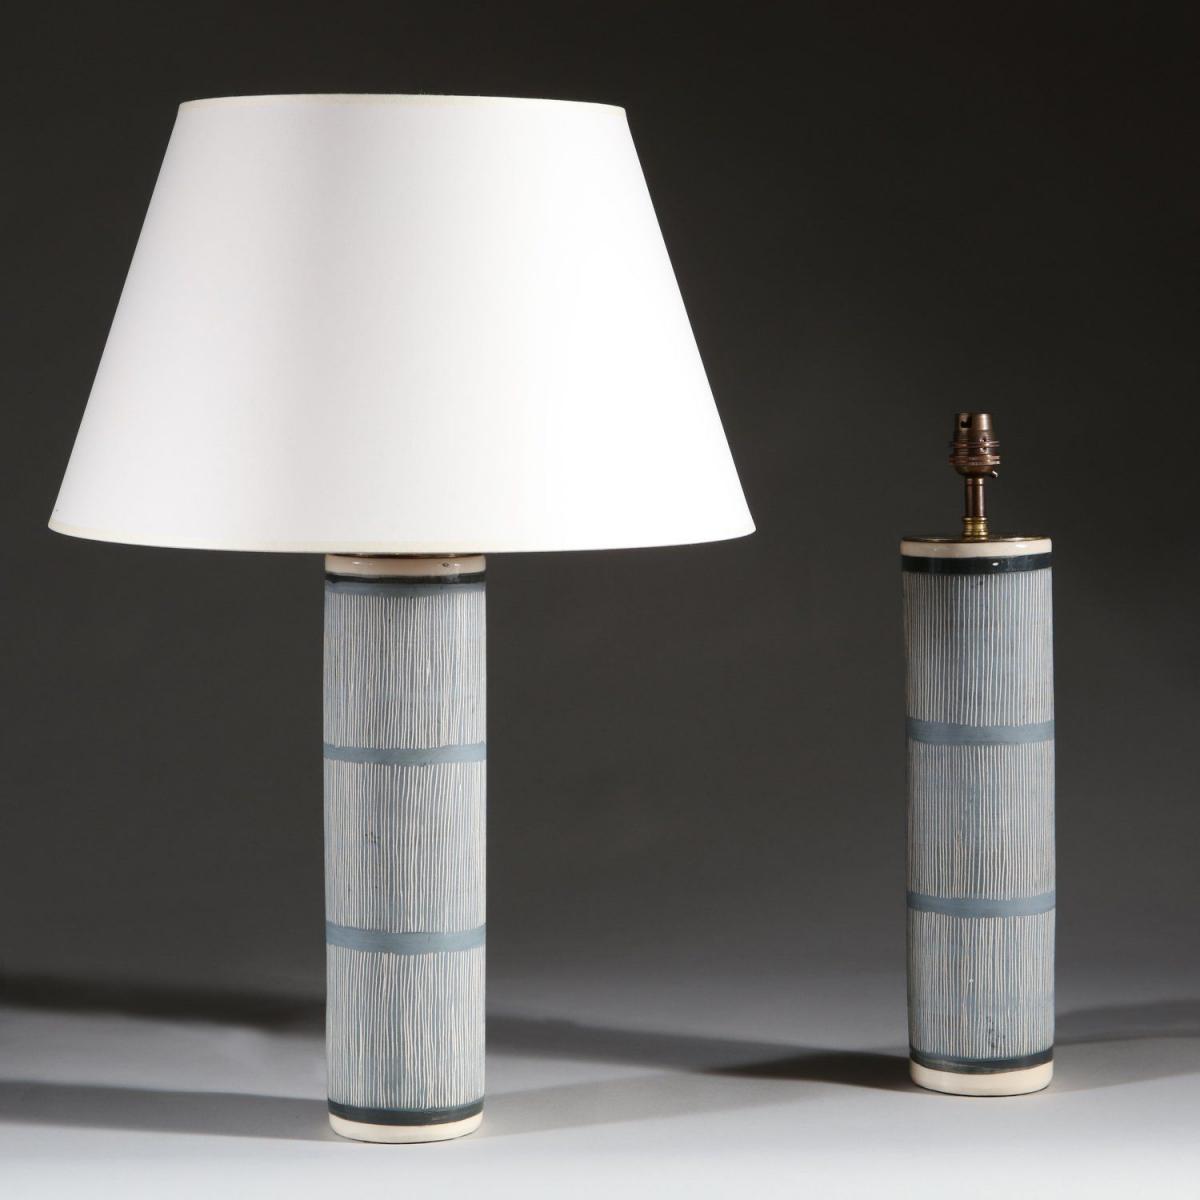 A Pair of Studio Pottery Lamps